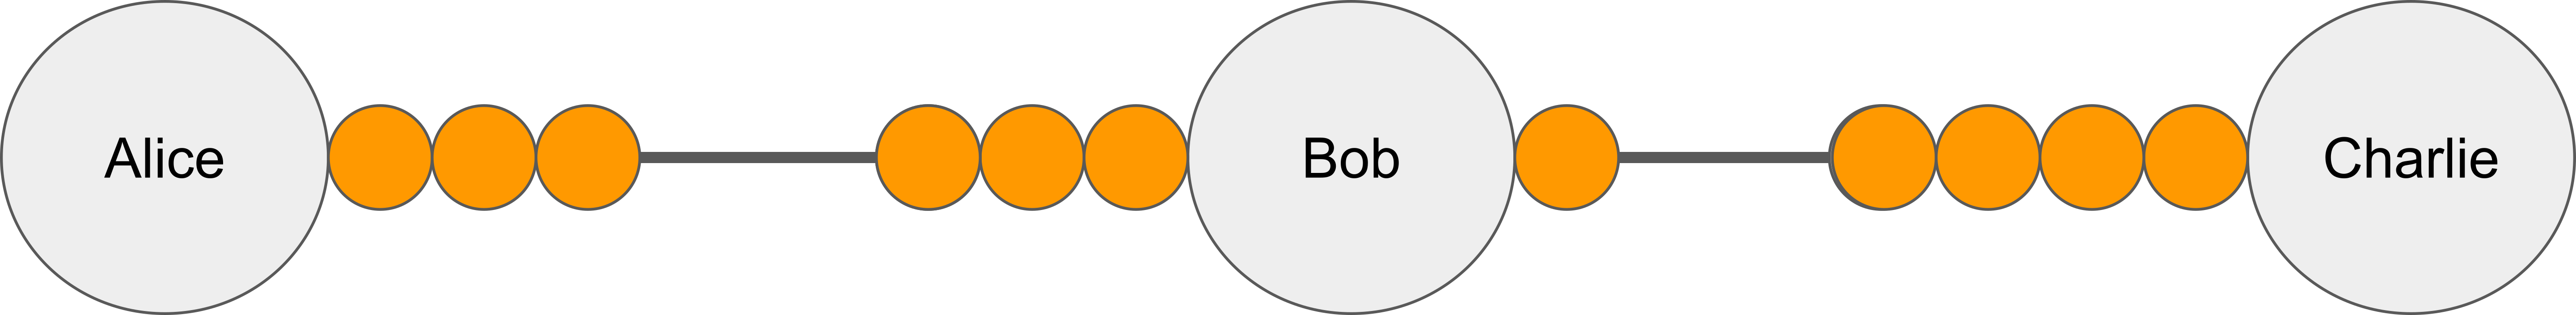 A payment path allowing Alice to send one coin to Charlie via Bob.